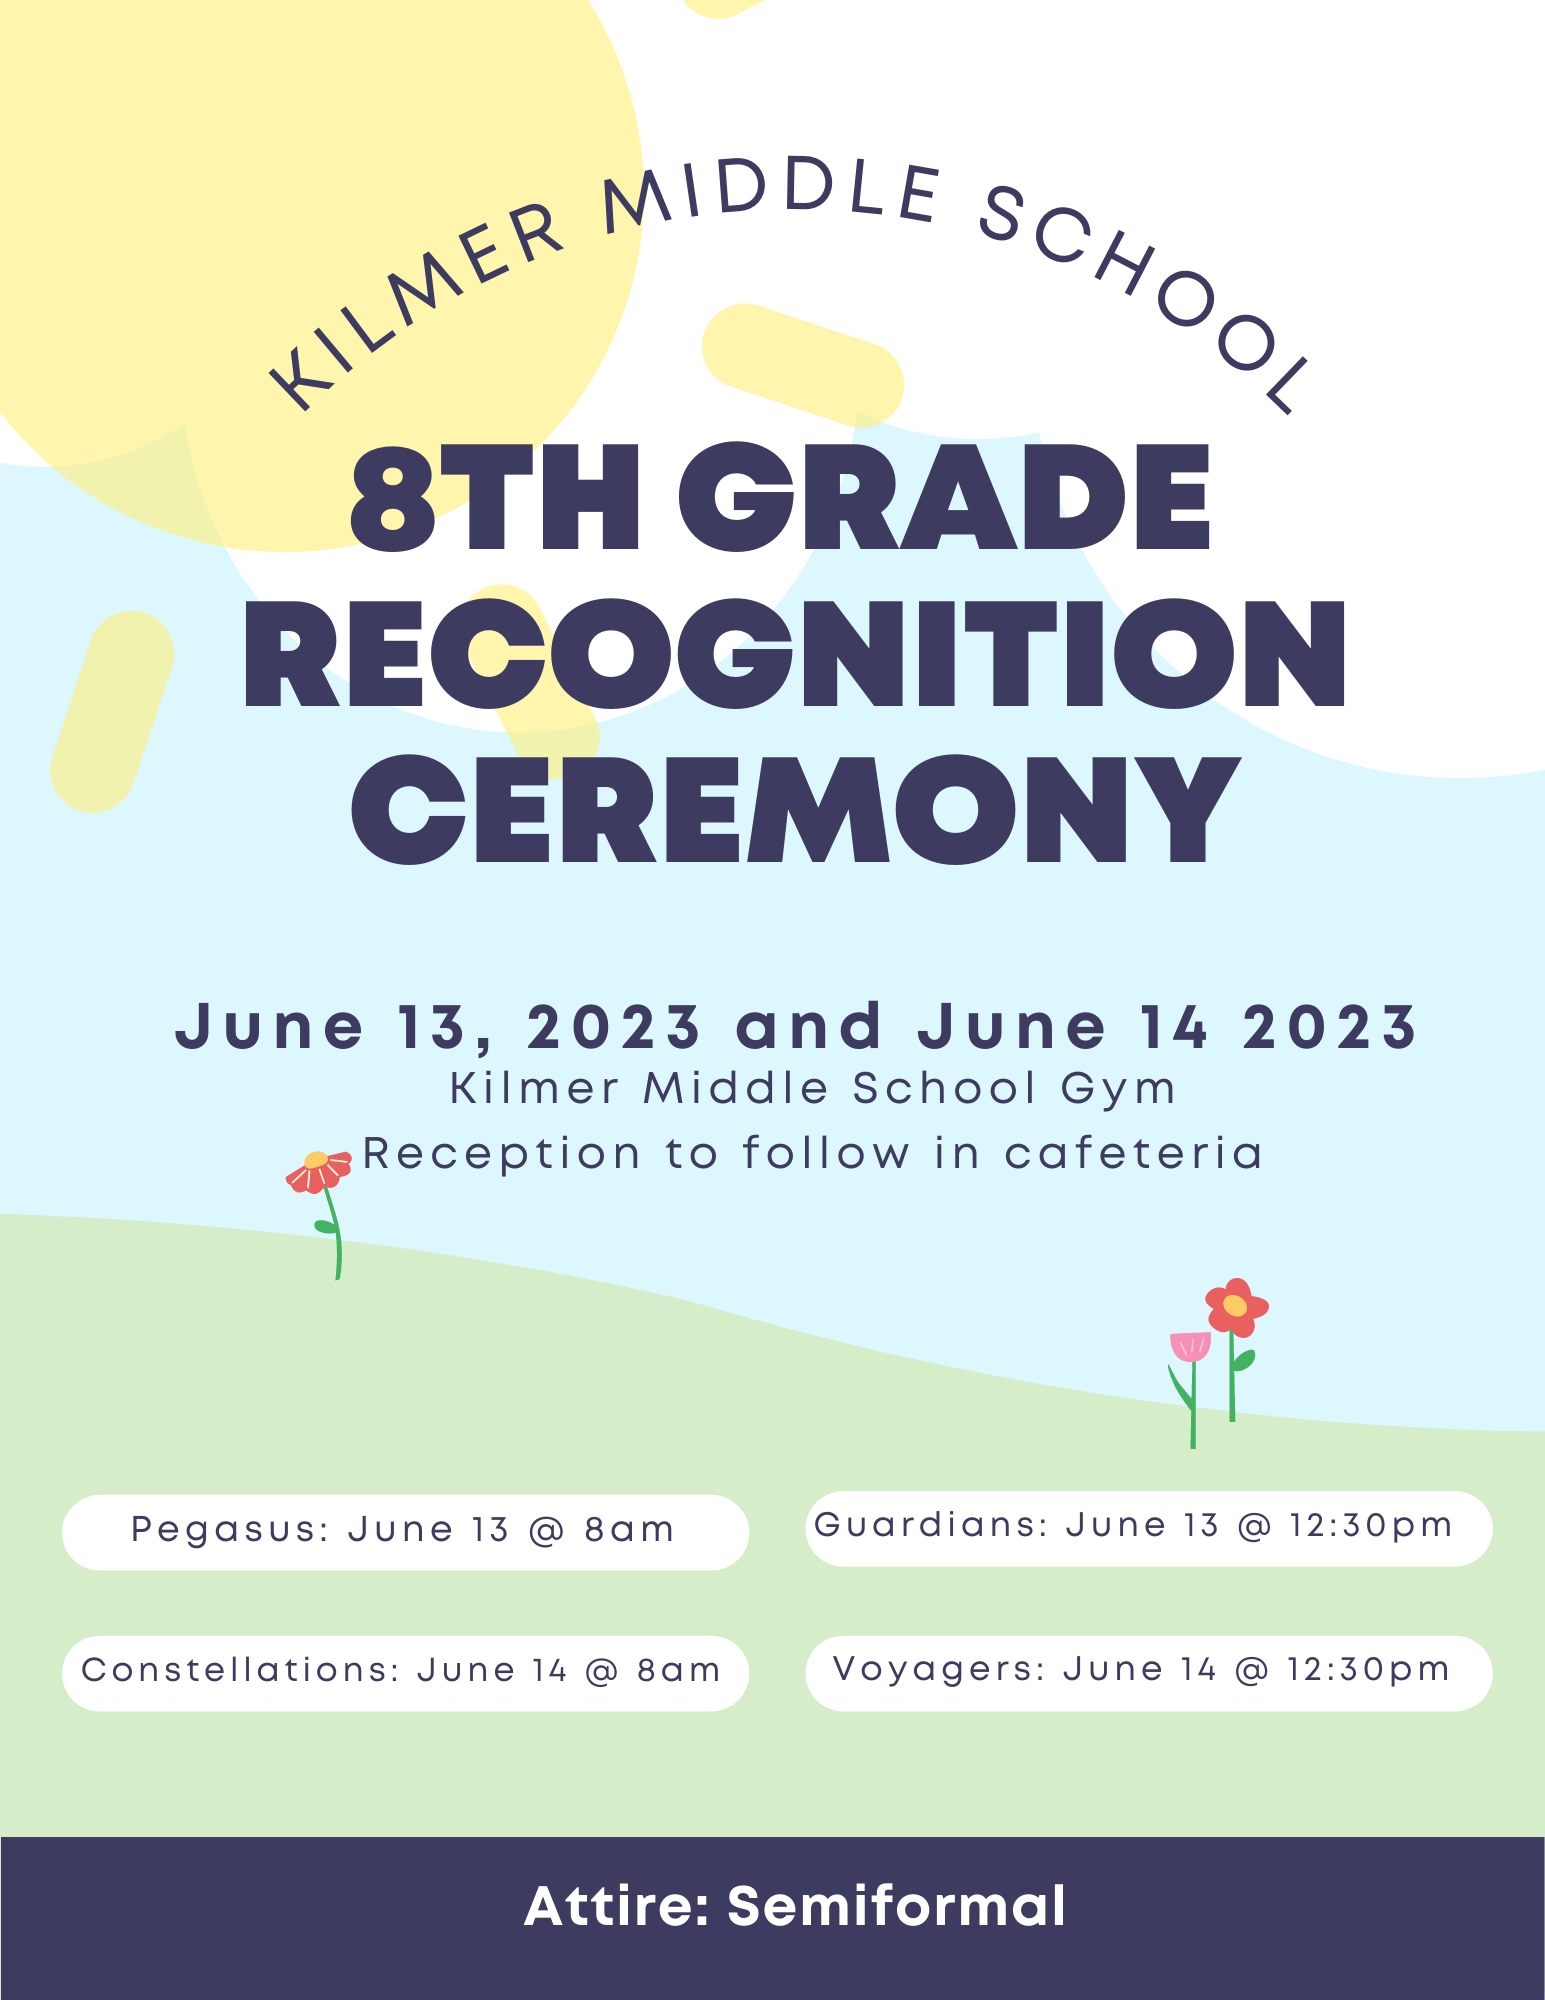 Kilmer Middle School 8th Grade Recognition Ceremony on June 13, 2023 and June 14, 2023. Kilmer Middle School Gym. Reception to follow in Cafeteria. Pegasus and Guardians will be on 6/13 at 12:30. Constellations and Voyagers will be 6/14 at 12:30.  Attire is semi-formal